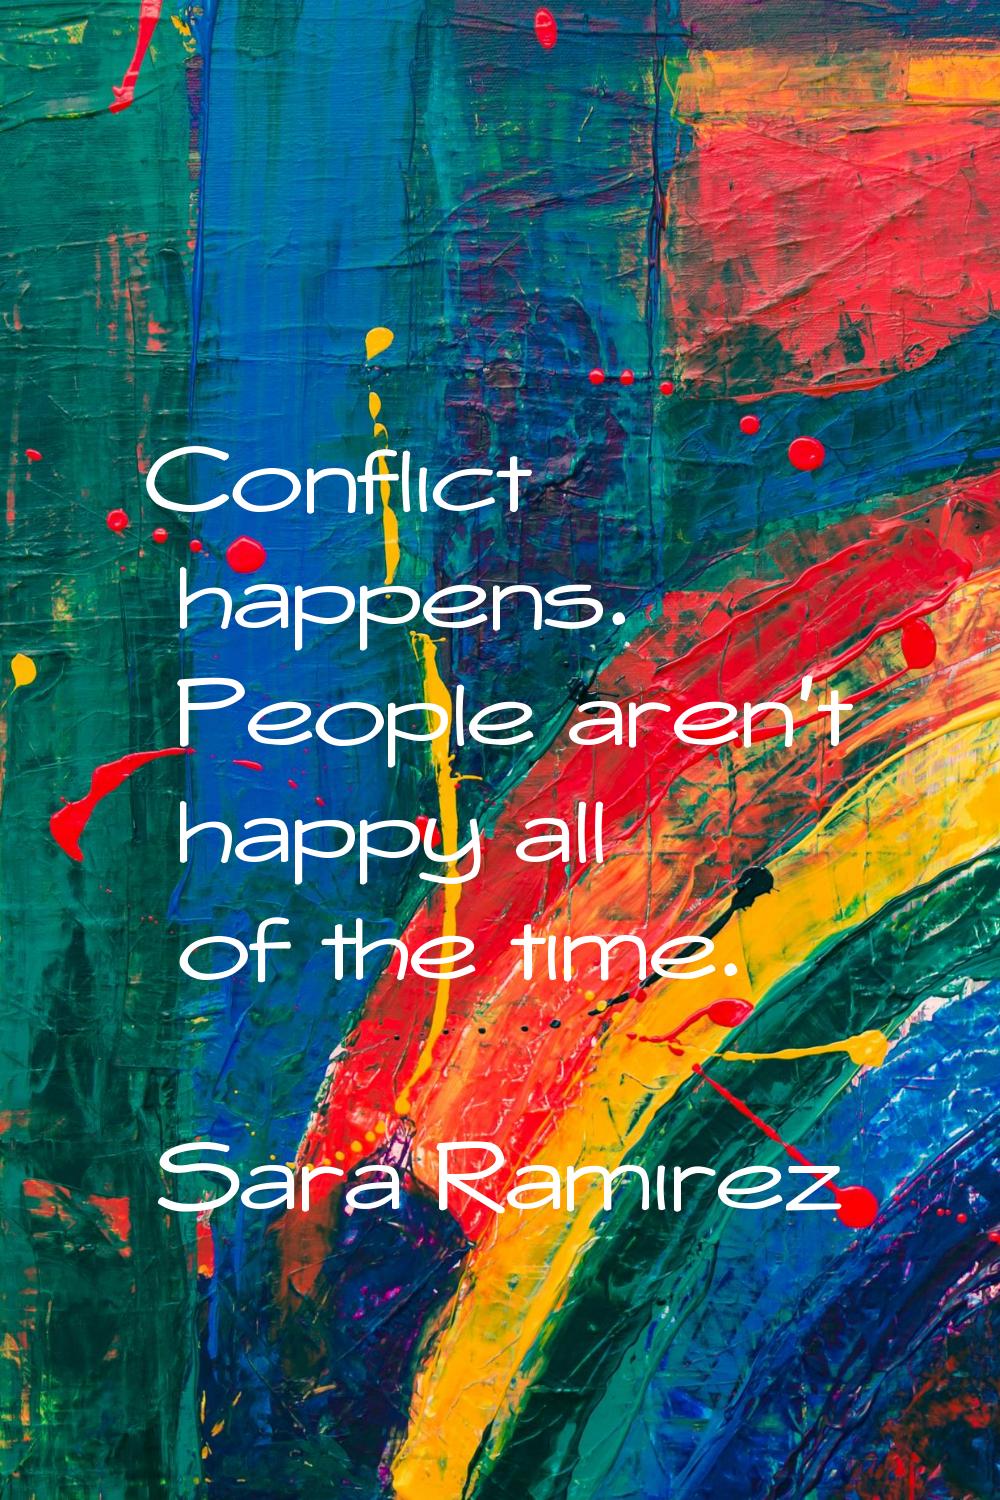 Conflict happens. People aren't happy all of the time.